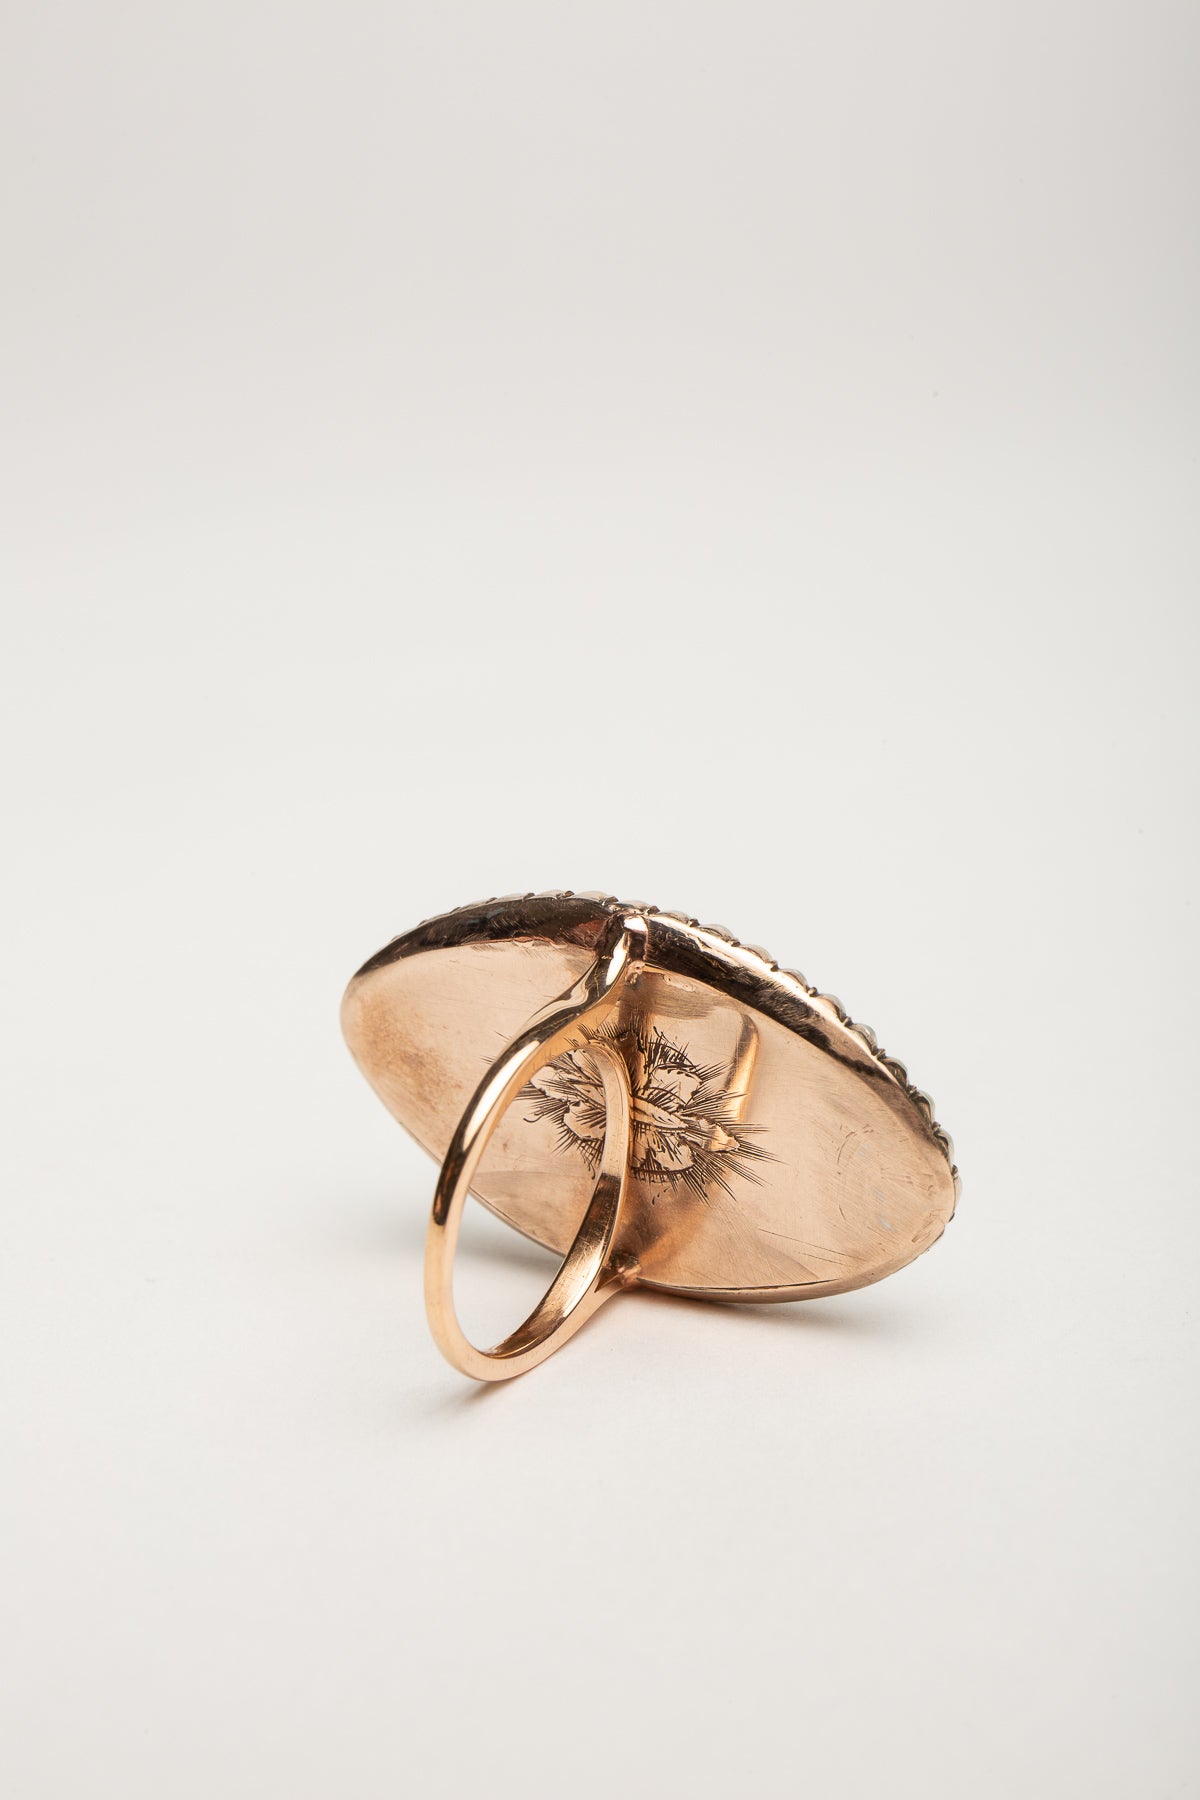 MAXFIELD PRIVATE COLLECTION | 1800'S PAINTED EYE PEARL RING